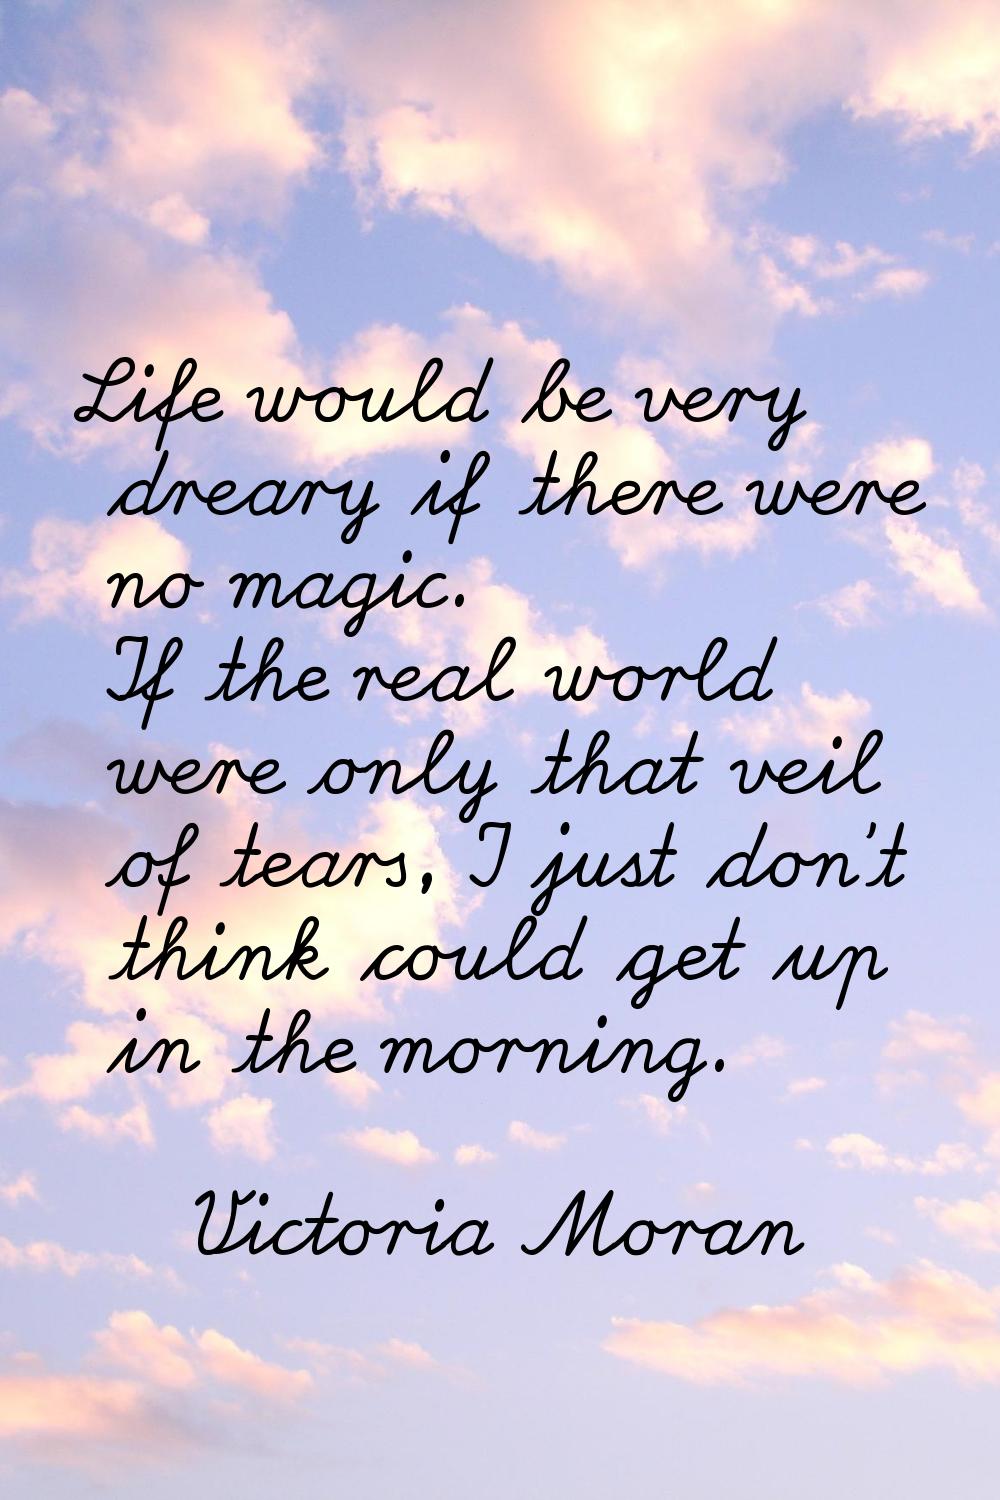 Life would be very dreary if there were no magic. If the real world were only that veil of tears, I